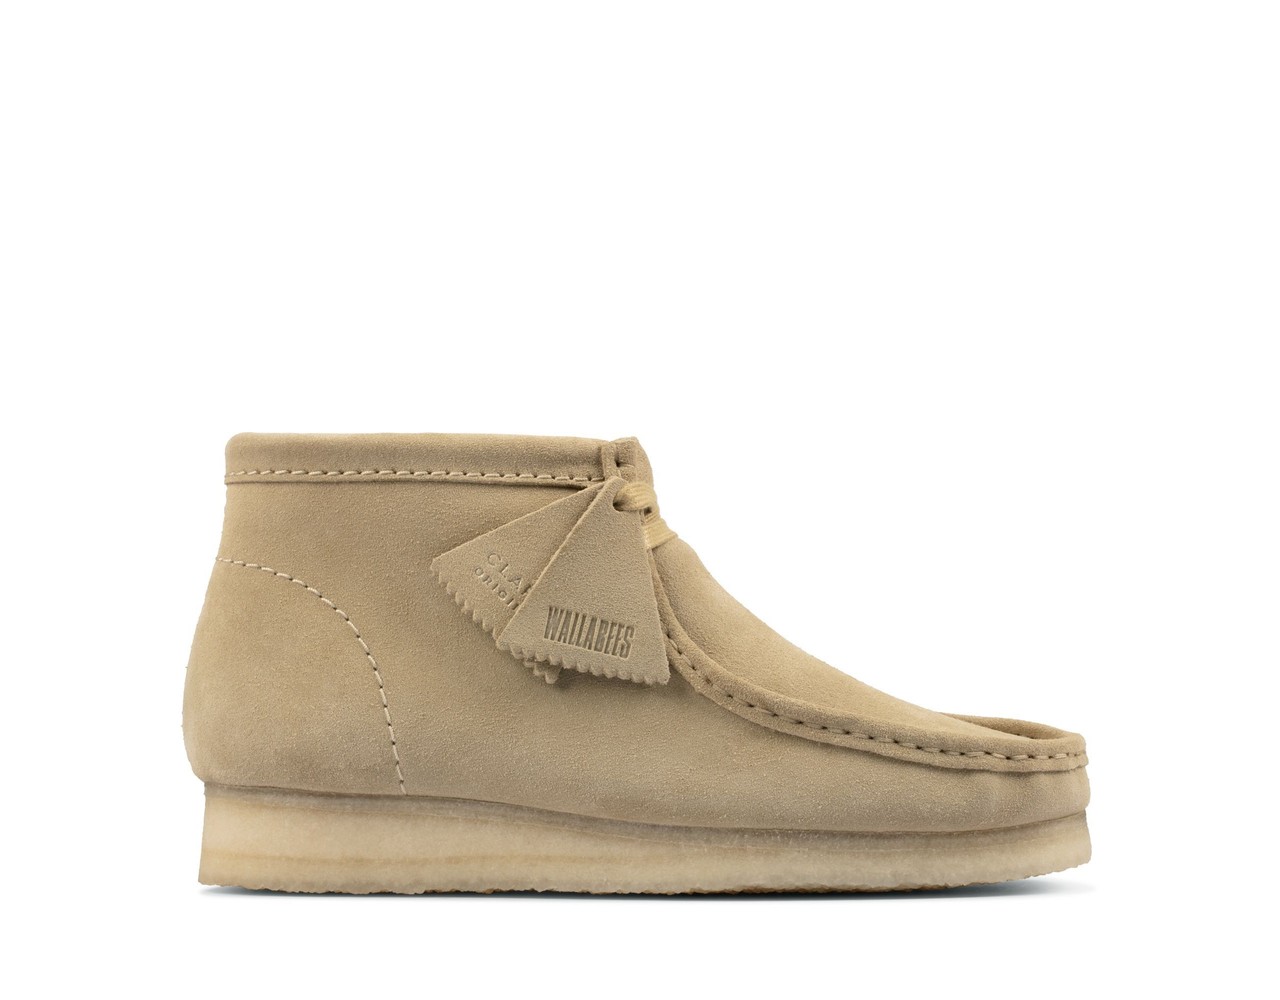 Ophef Hoes wastafel Clarks Originals Wallabee Boot Maple Suede - Behind the Pines